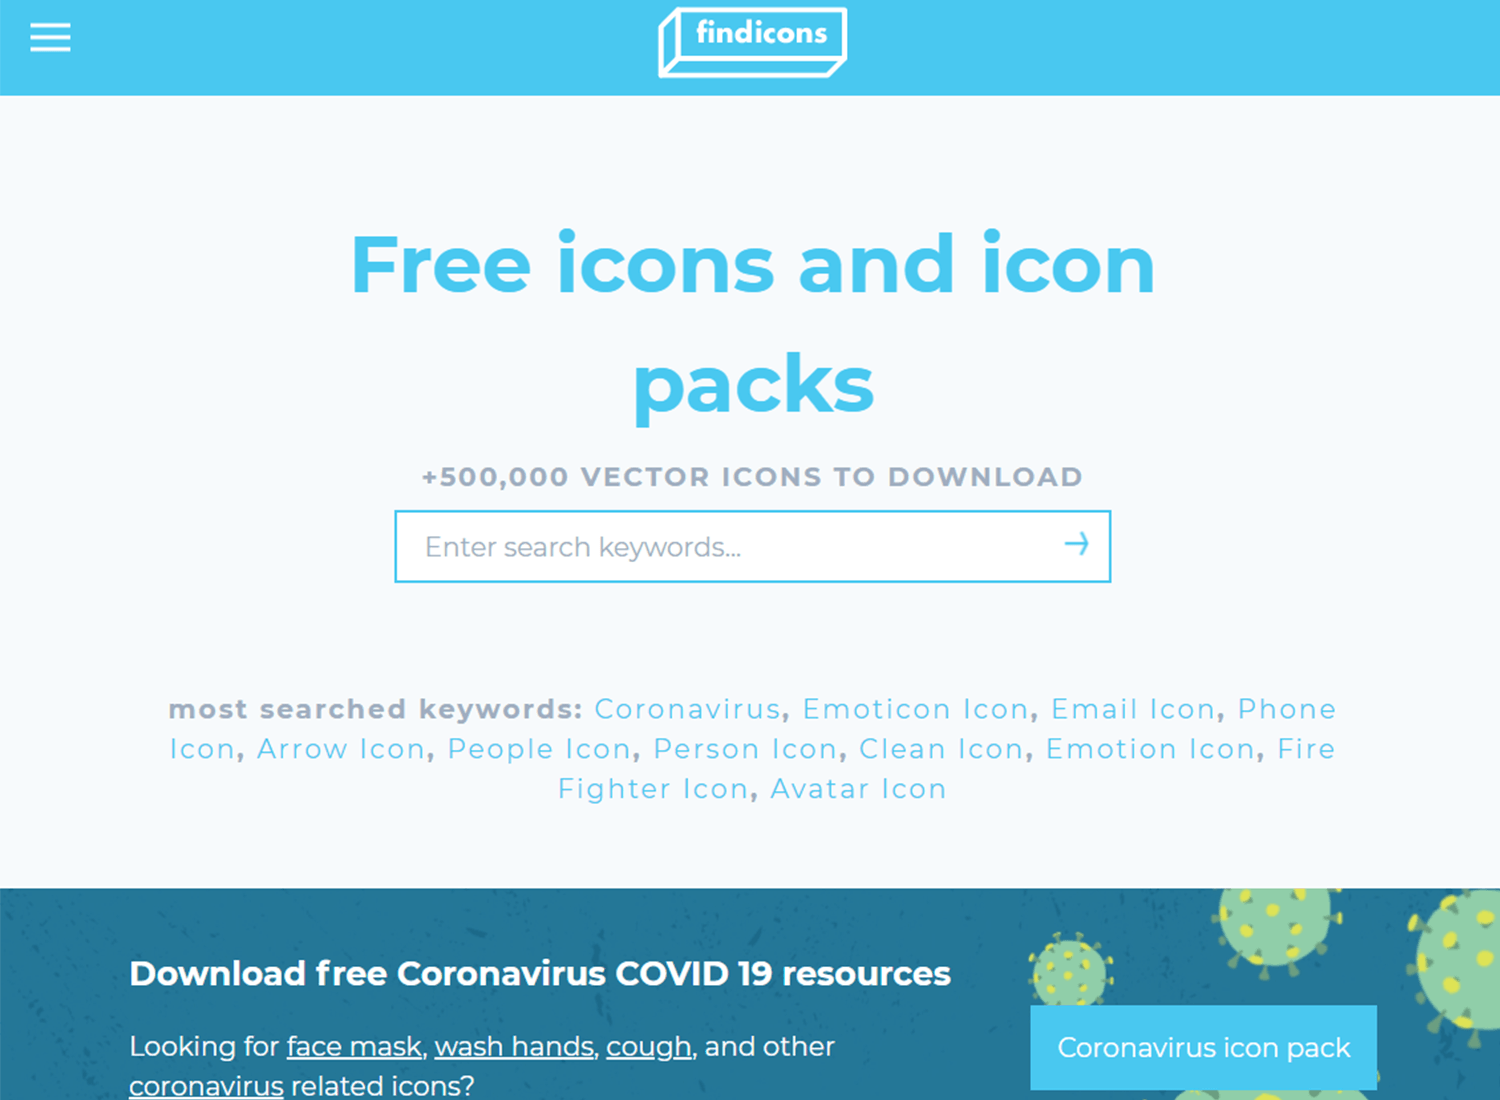 icons fro free website design at findicons